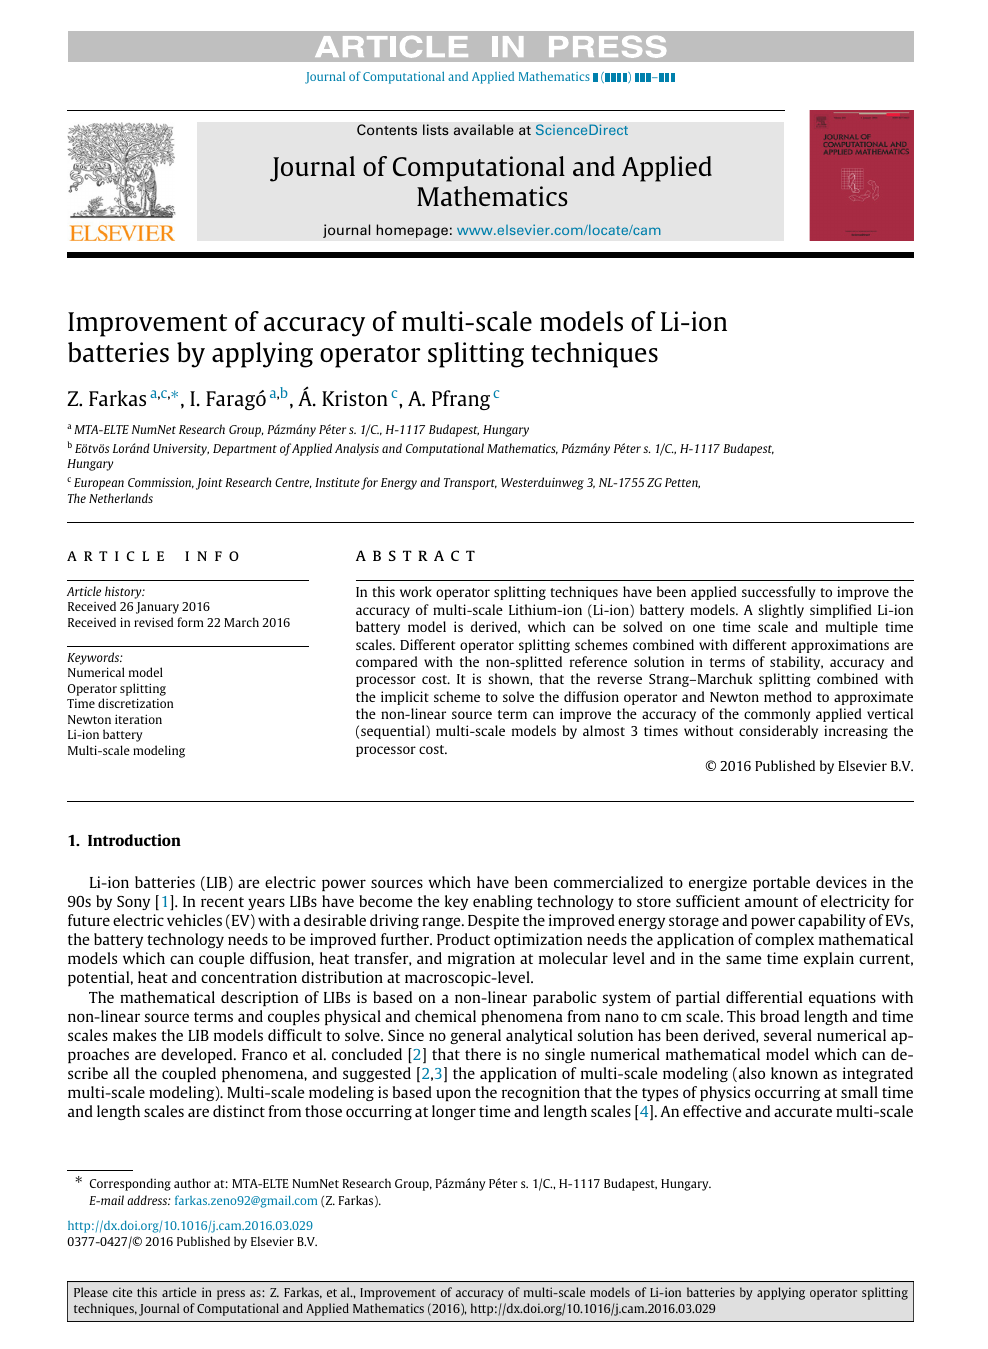 Improvement Of Accuracy Of Multi Scale Models Of Li Ion Batteries By Applying Operator Splitting Techniques Topic Of Research Paper In Mathematics Download Scholarly Article Pdf And Read For Free On Cyberleninka Open